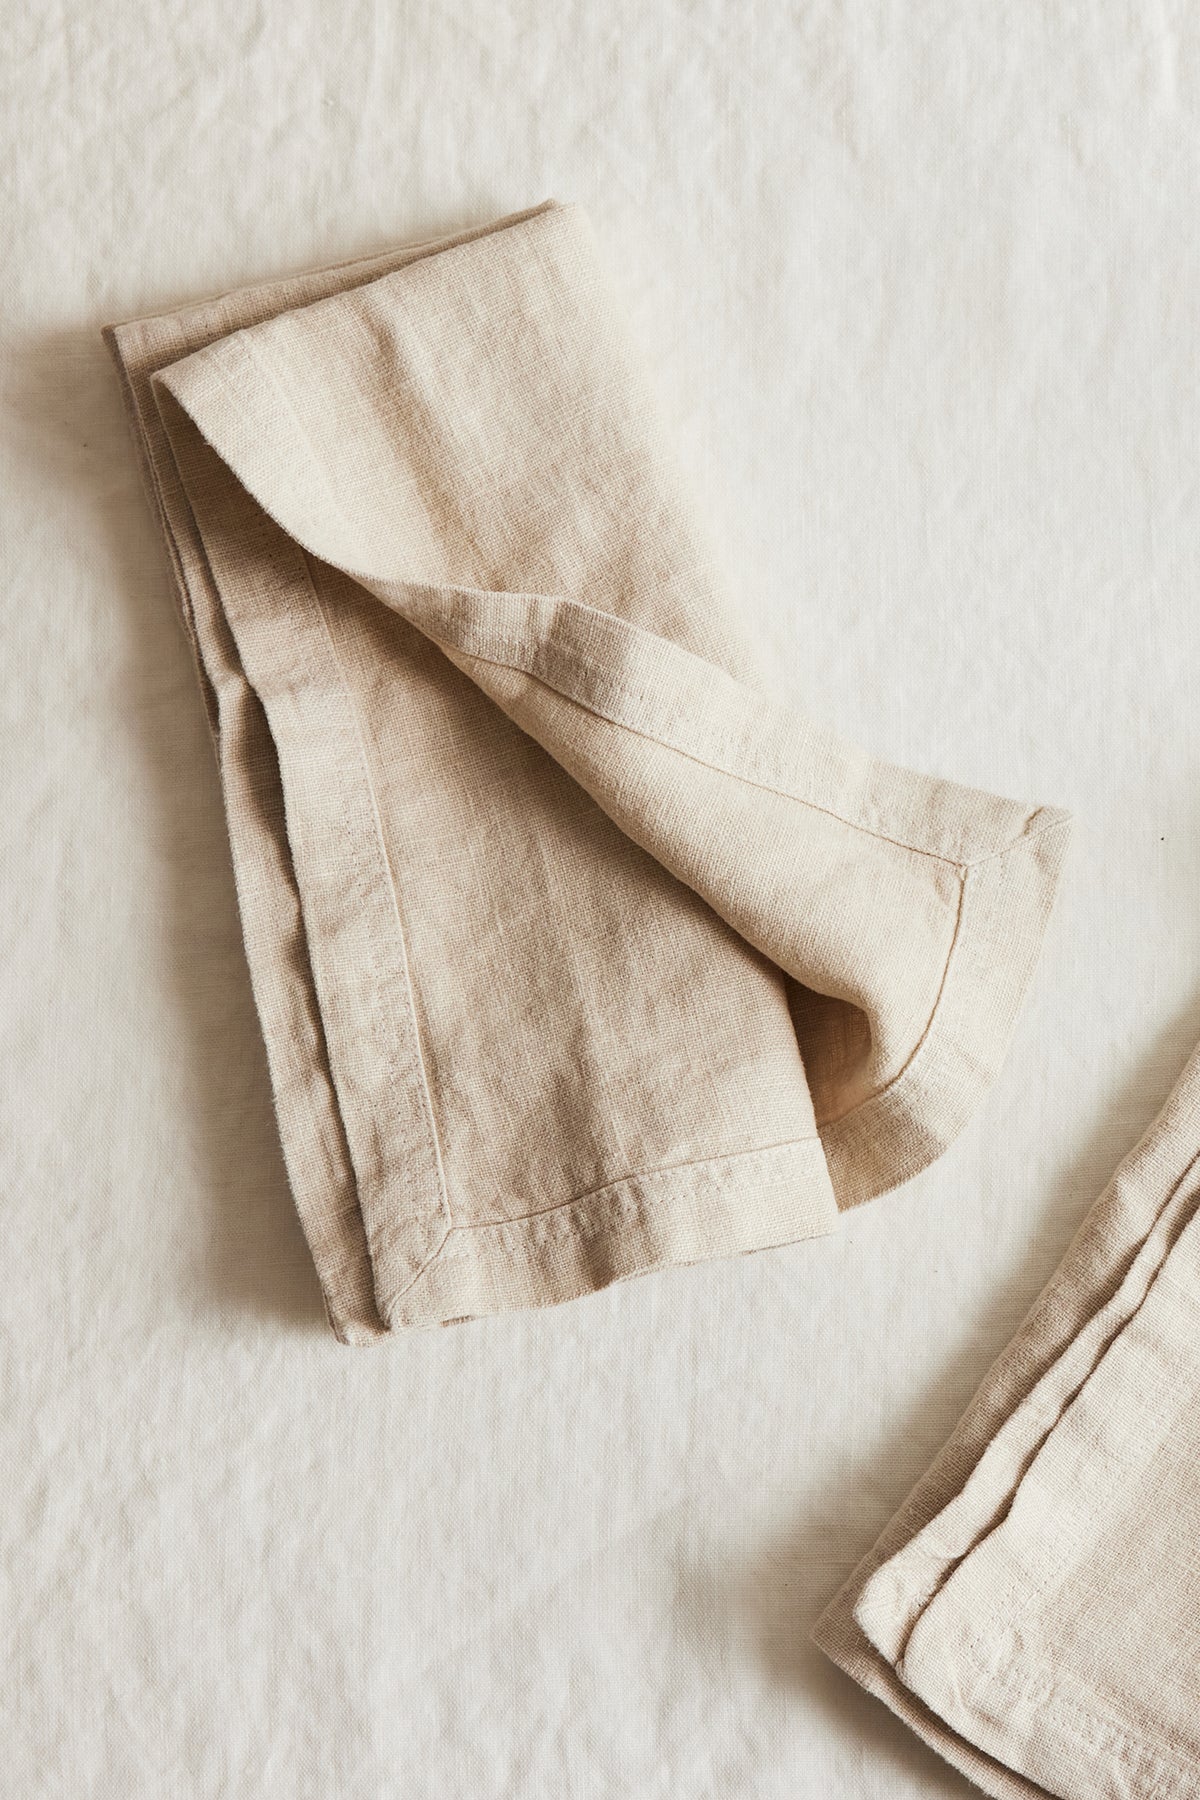 A set of Jenny Graham Home luxe finish linen napkins, an everyday kitchen essential, on a white surface.-25629316546753